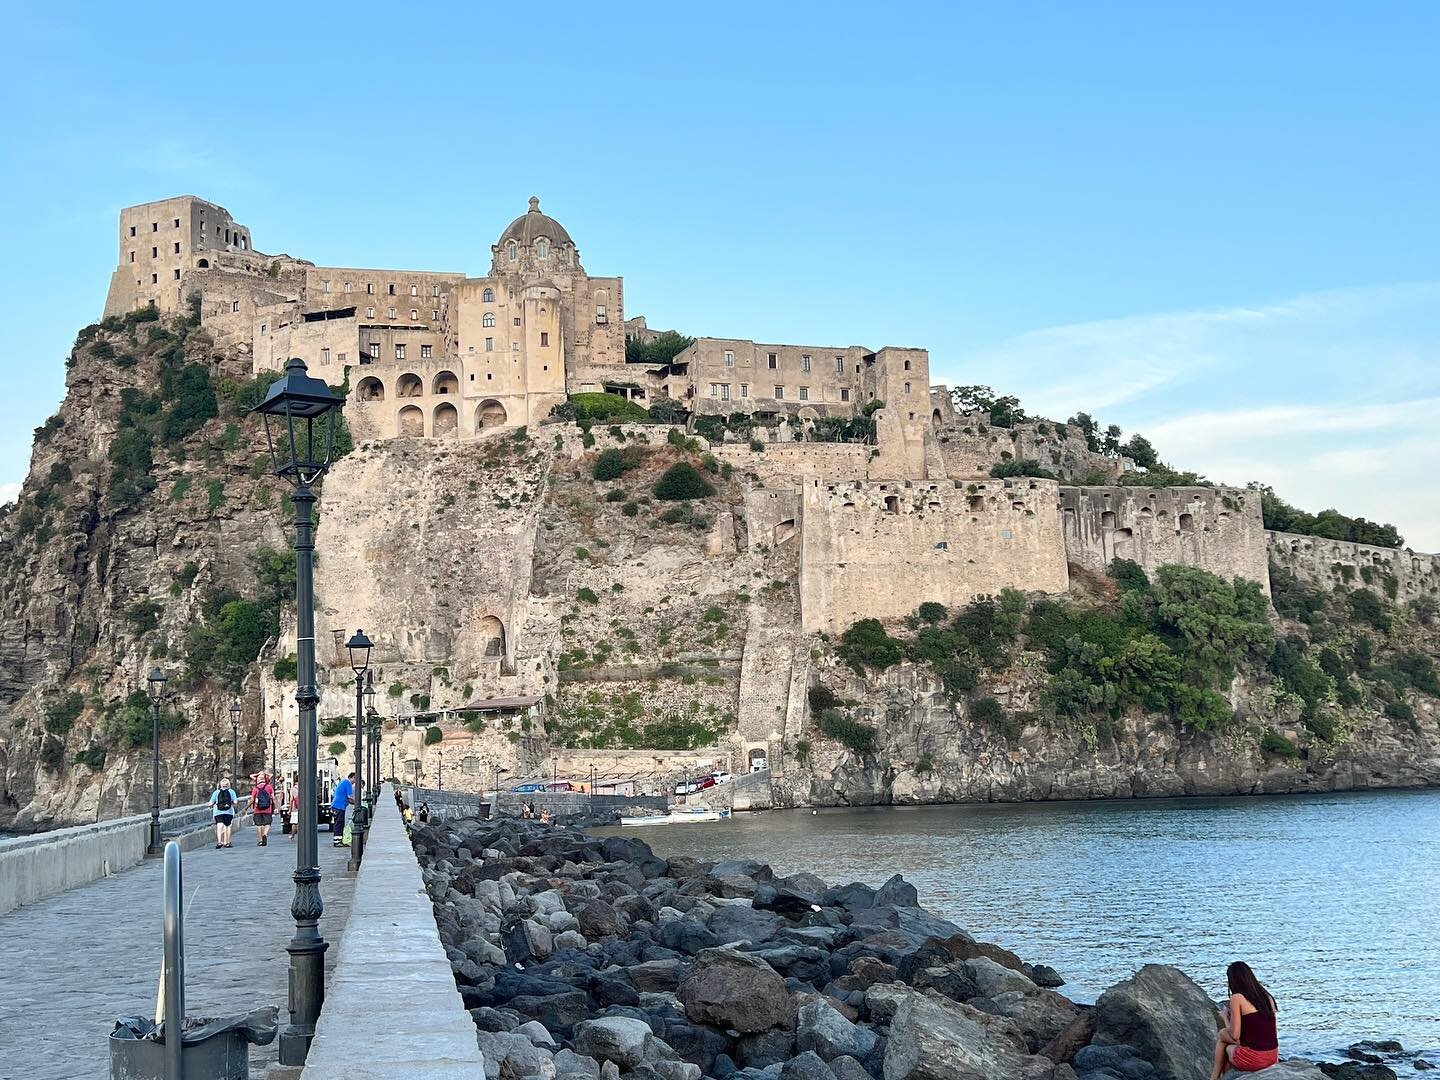 Two days in Ischia (ish-key-ah). Super chill day. Amazing food and this castle which was built in 474BC. Castello Aragonese d'Ischia. Do you believe that? It is 2500 years old.  This island is gritty and a bit raw, not the polish of Sorrento but auth